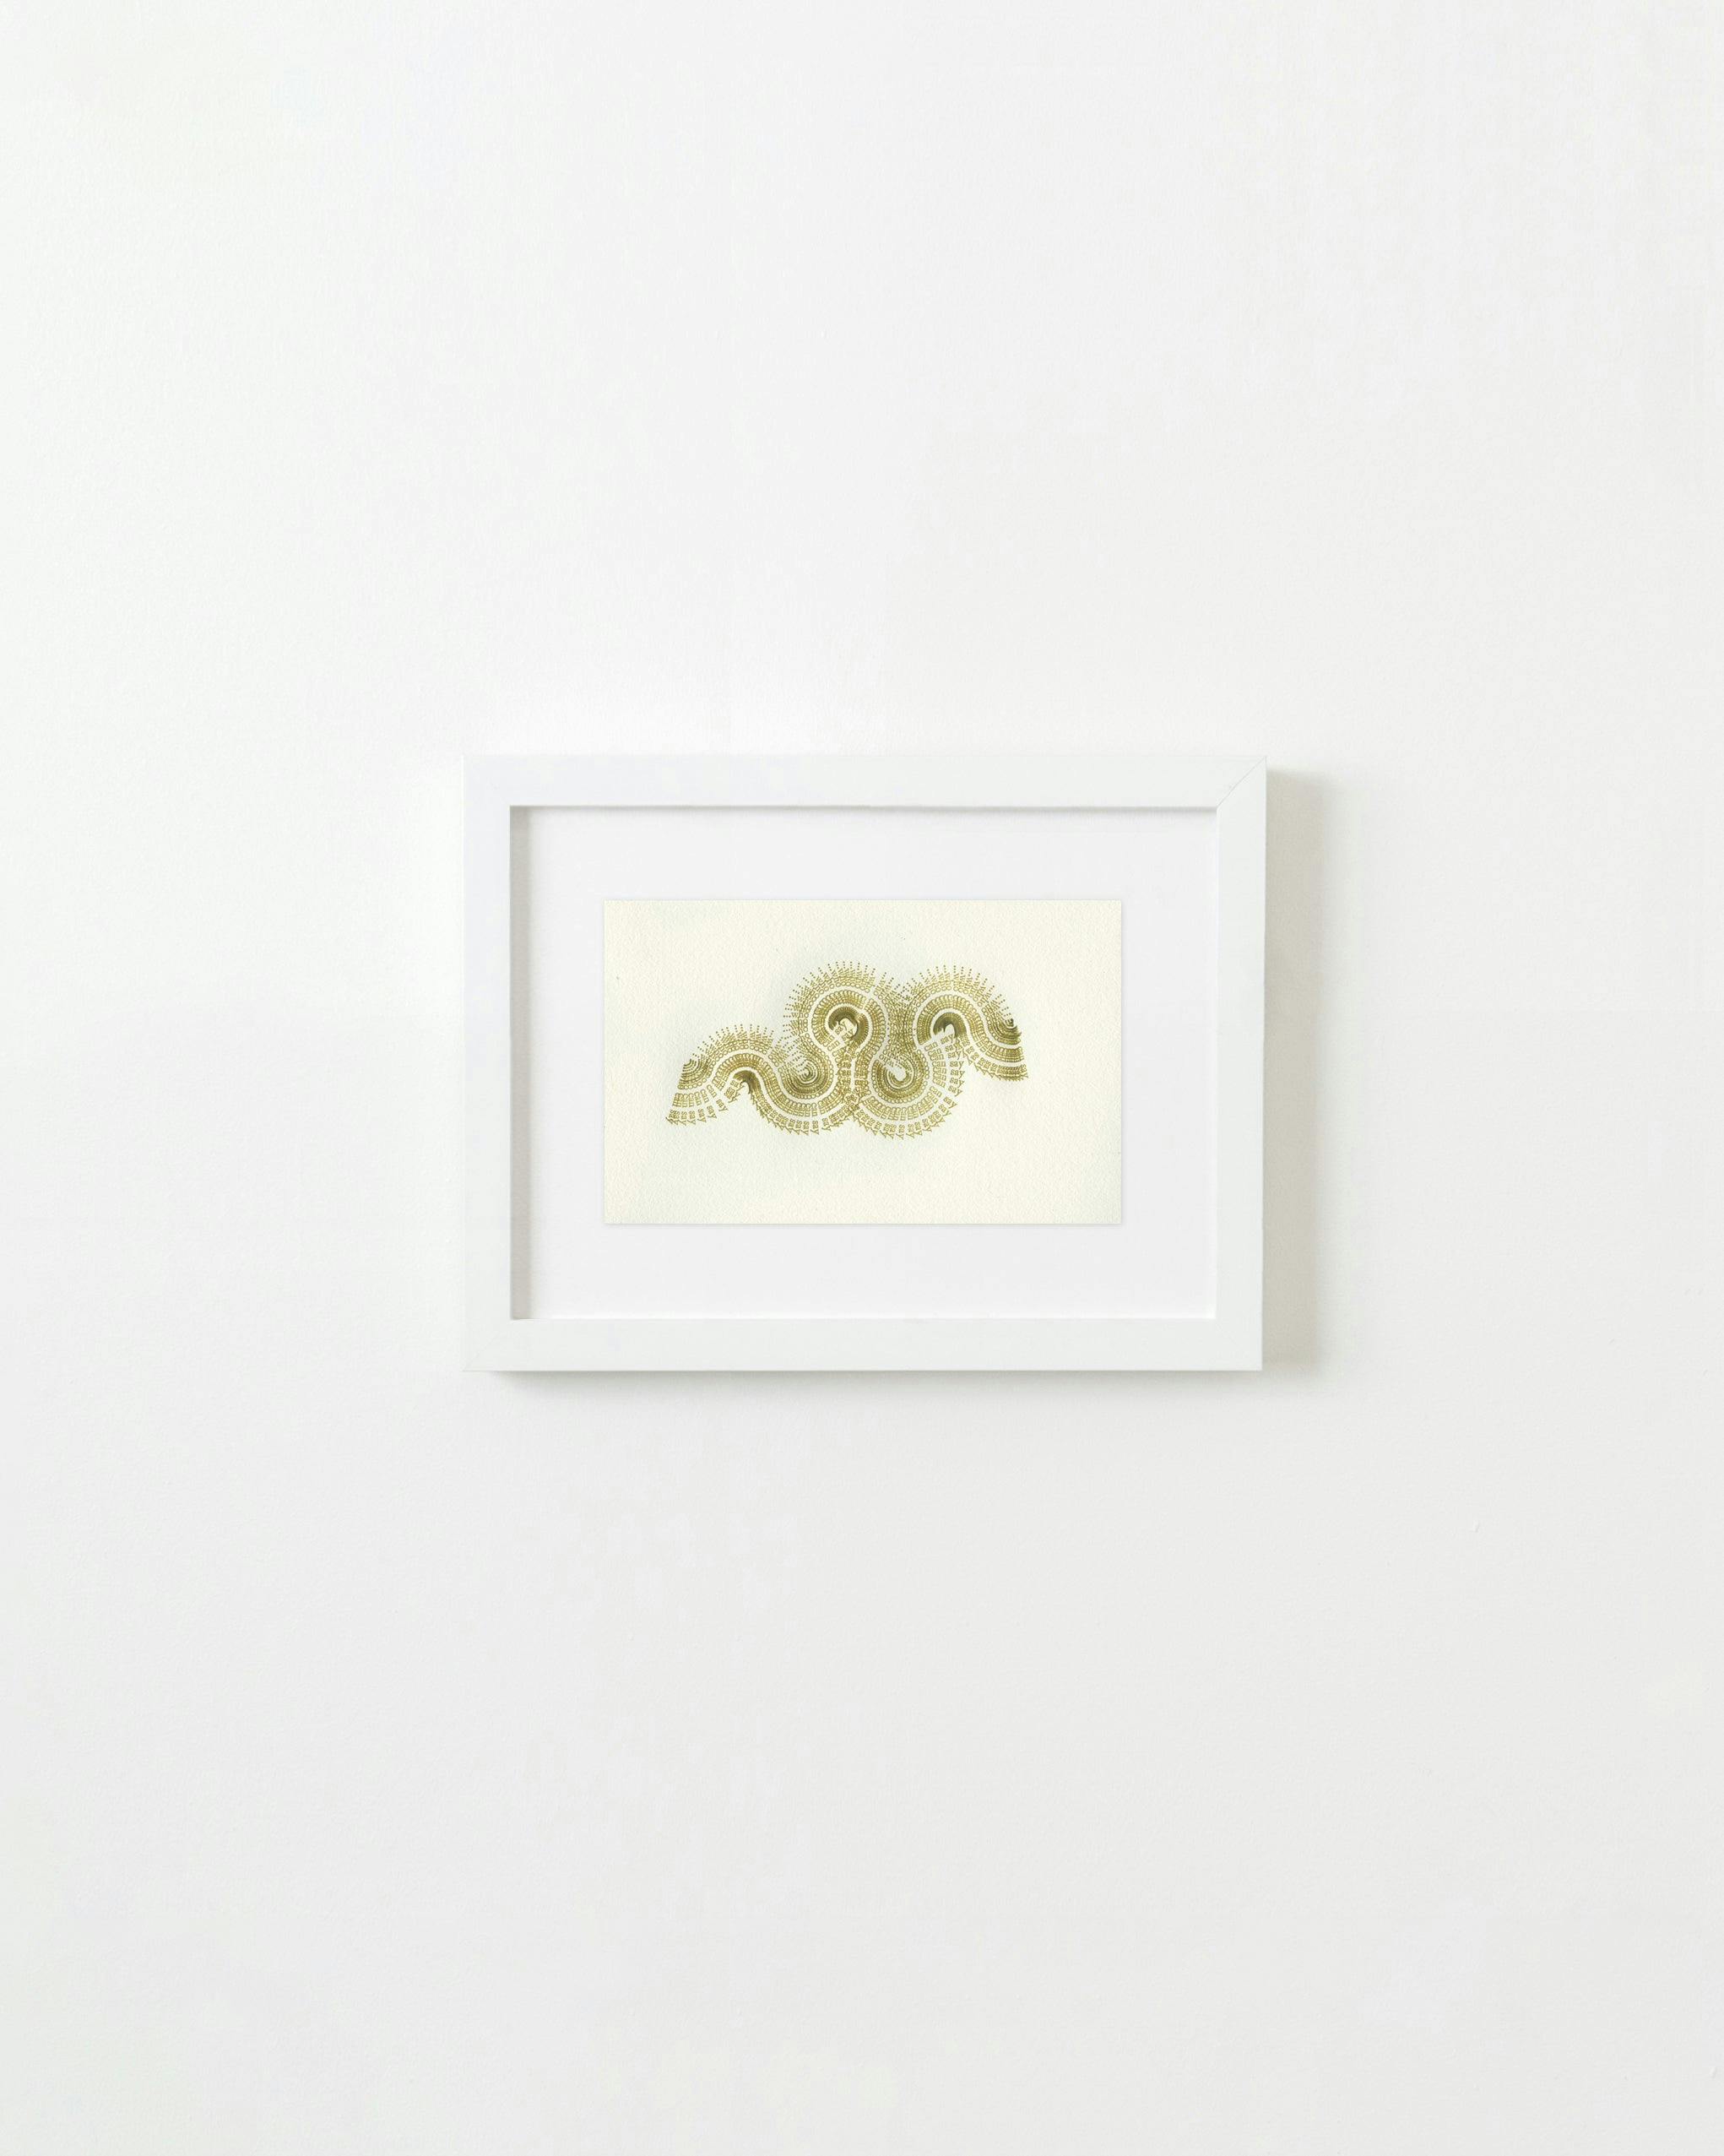 Print by Alyson Provax titled "Untitled (...who can say)".